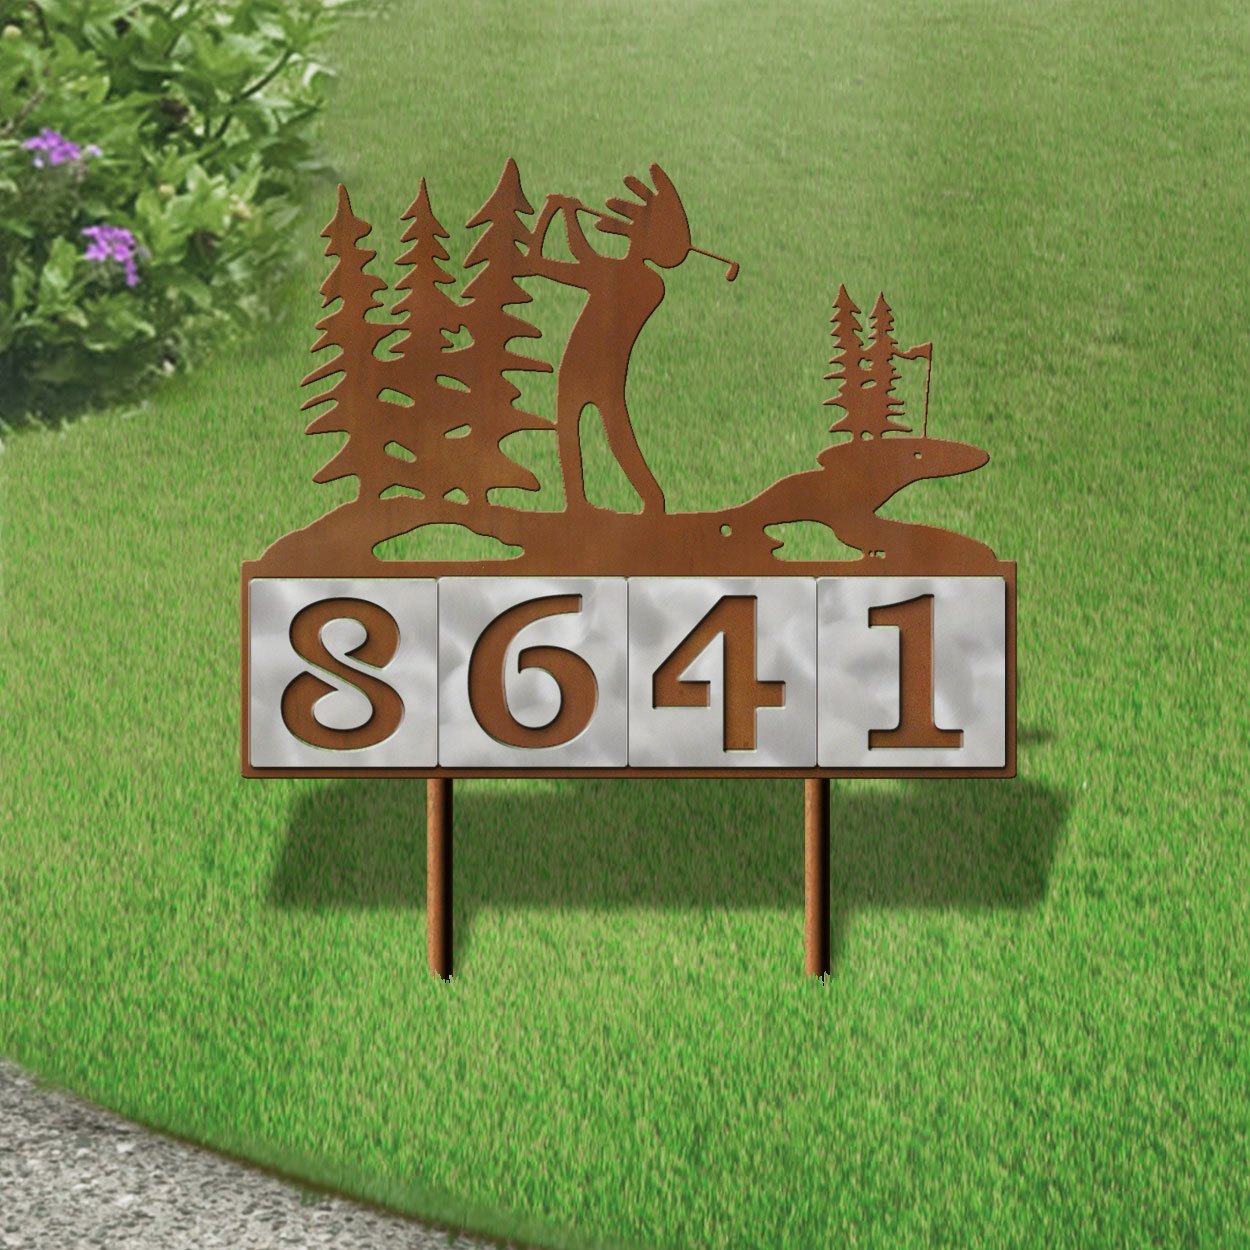 610144 - Kokopelli Golfer in the Woods Design 4-Digit Horizontal 6-inch Tile Outdoor House Numbers Yard Sign